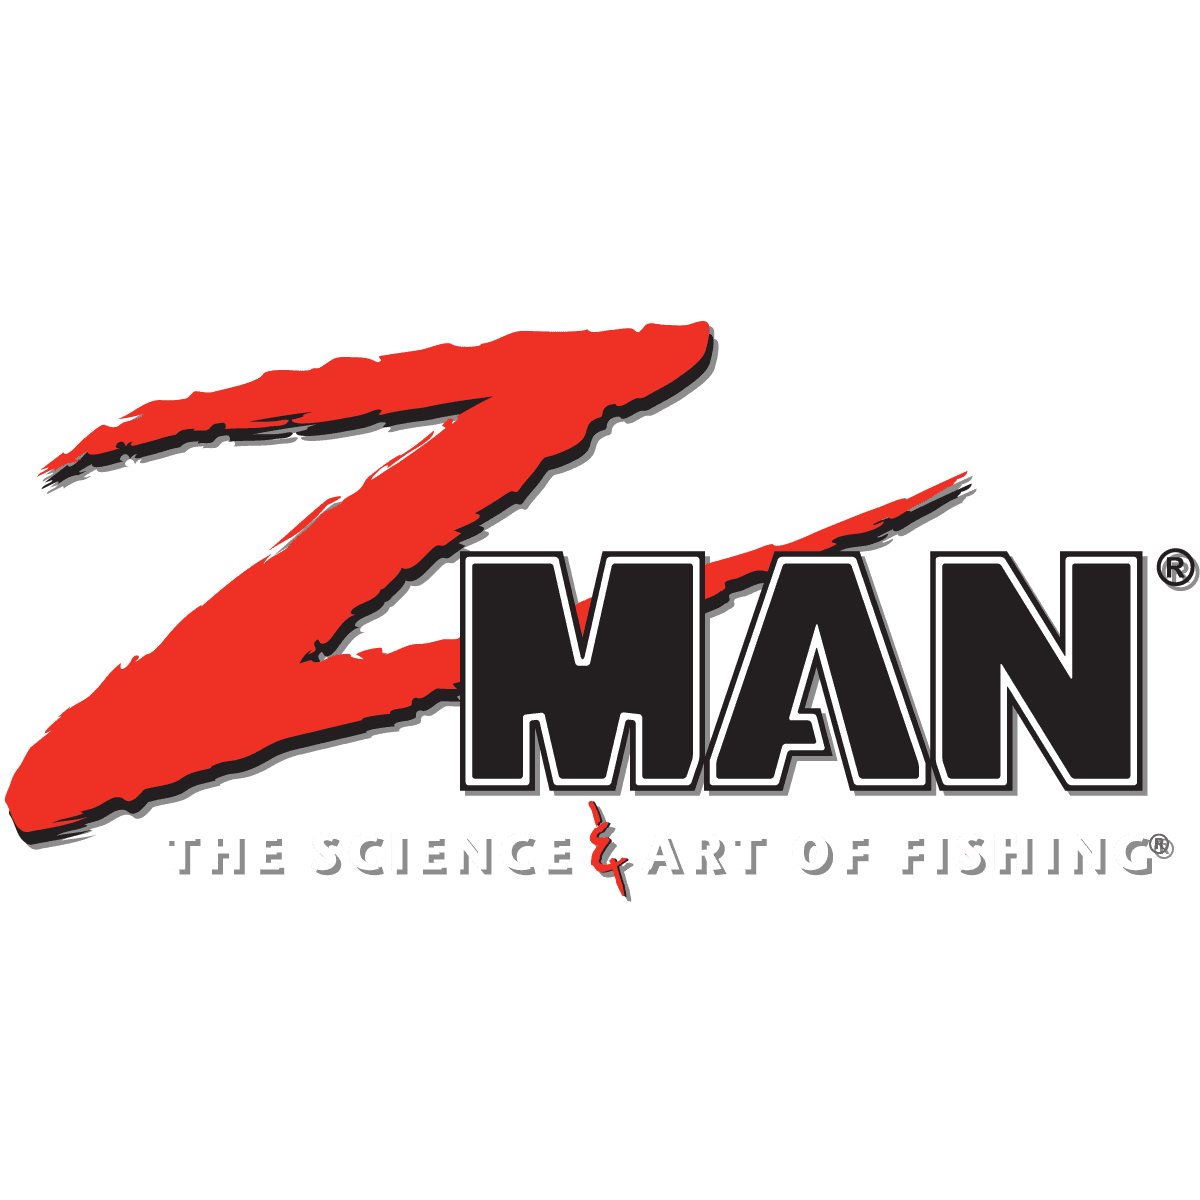 Z-Man Hires Industry Veteran To Marketing/Media Relations Role